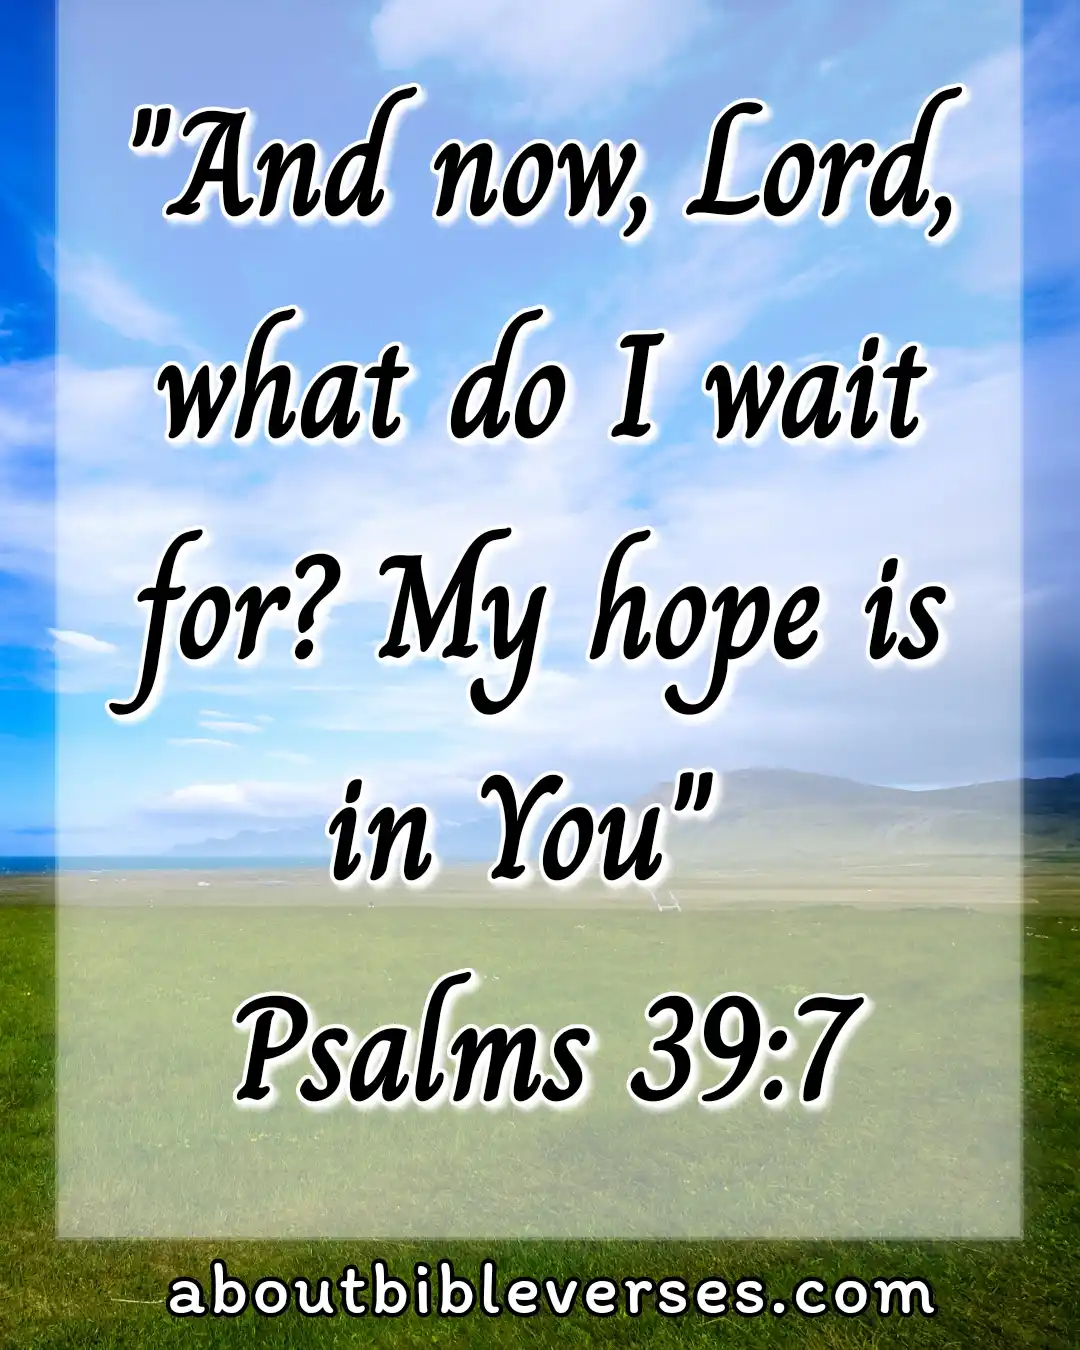 Bible verse about hope for the future (Psalm 39:7)